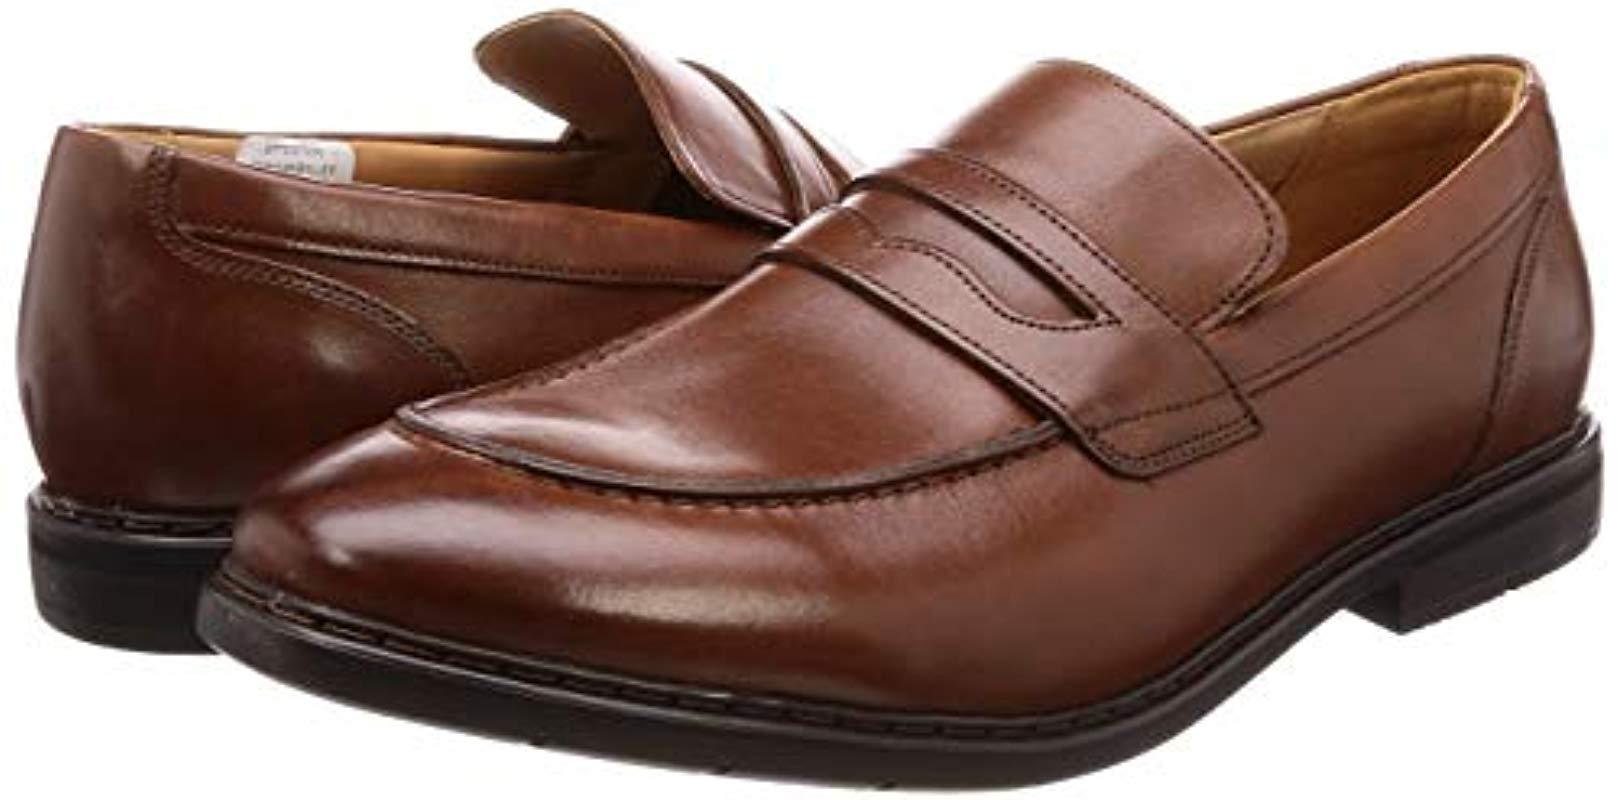 Clarks Leather Shoes 26133863 Banbury Step British in Brown for Men - Lyst